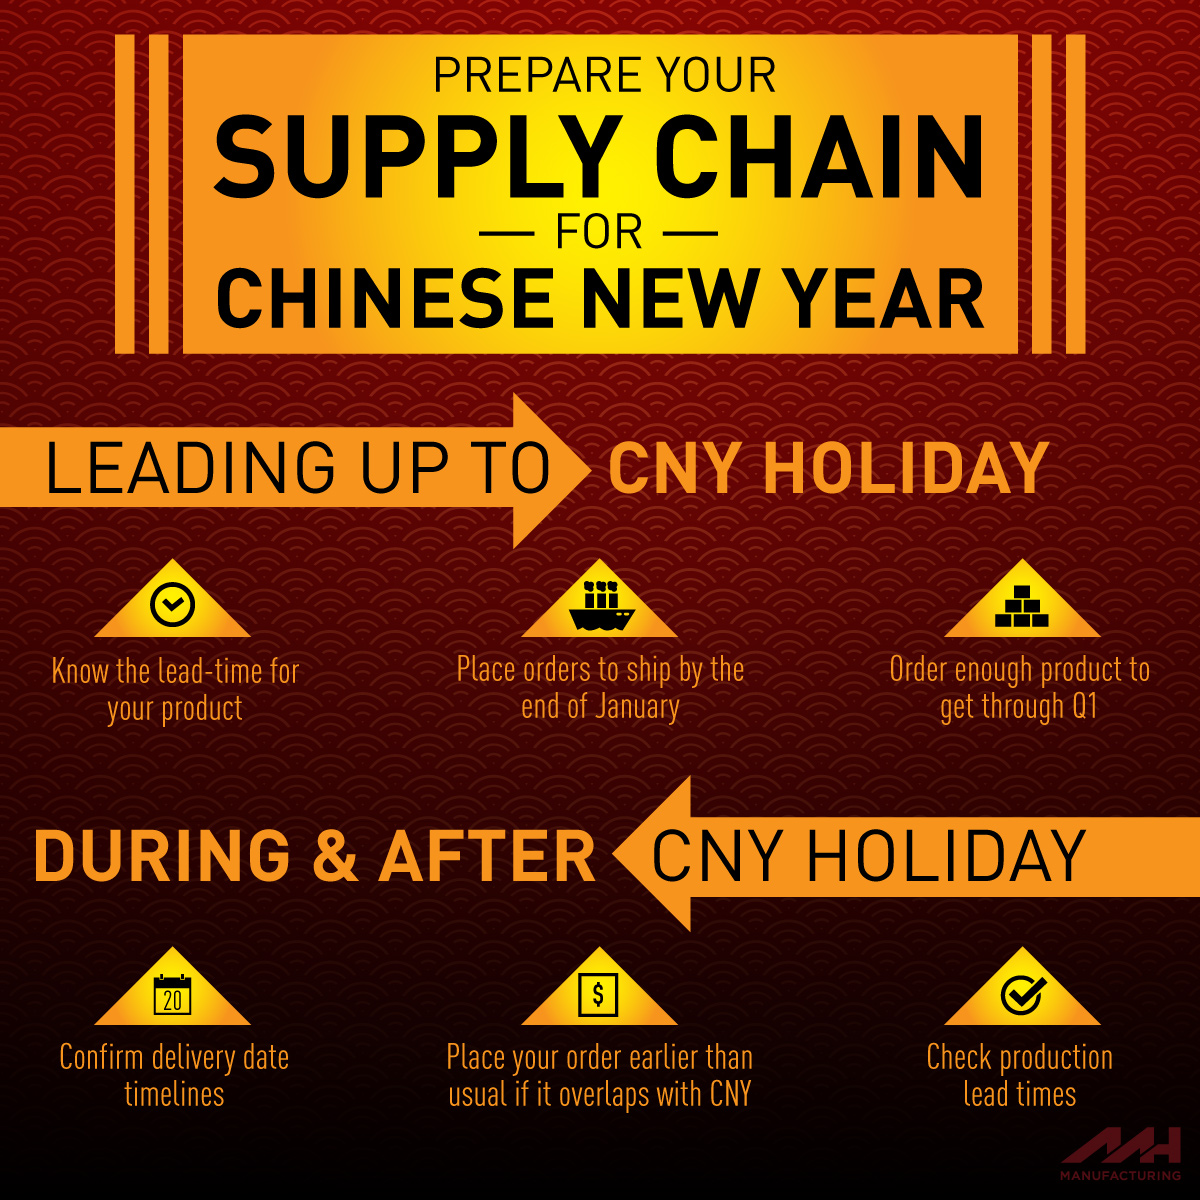 Prepare your supply chain for Chinese New Year